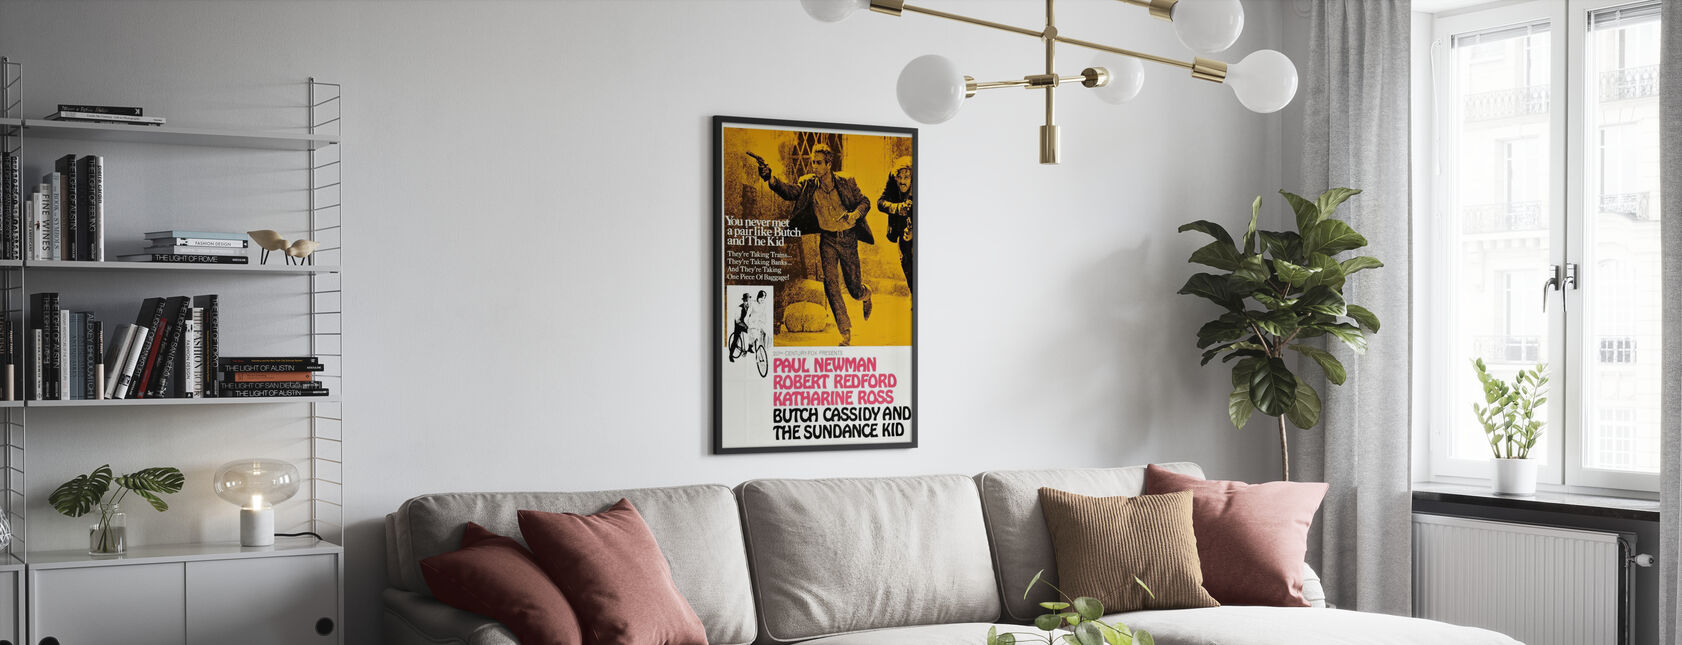 Butch Cassidy and the Sundance Kid - Poster - Living Room